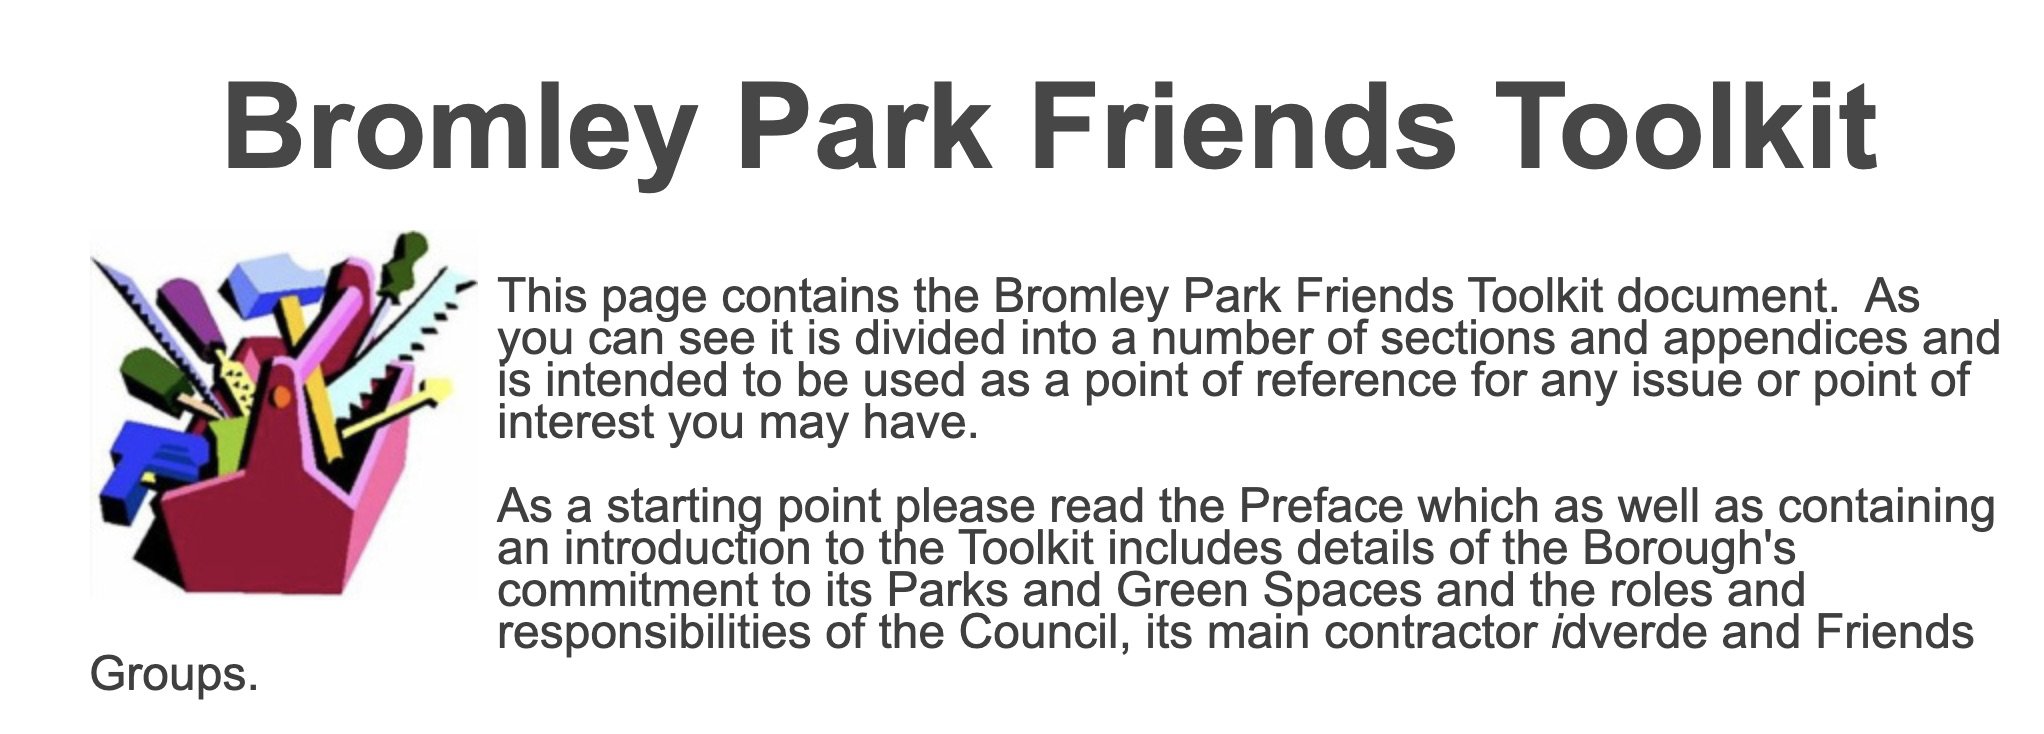 Bromley Park Friends Toolkit